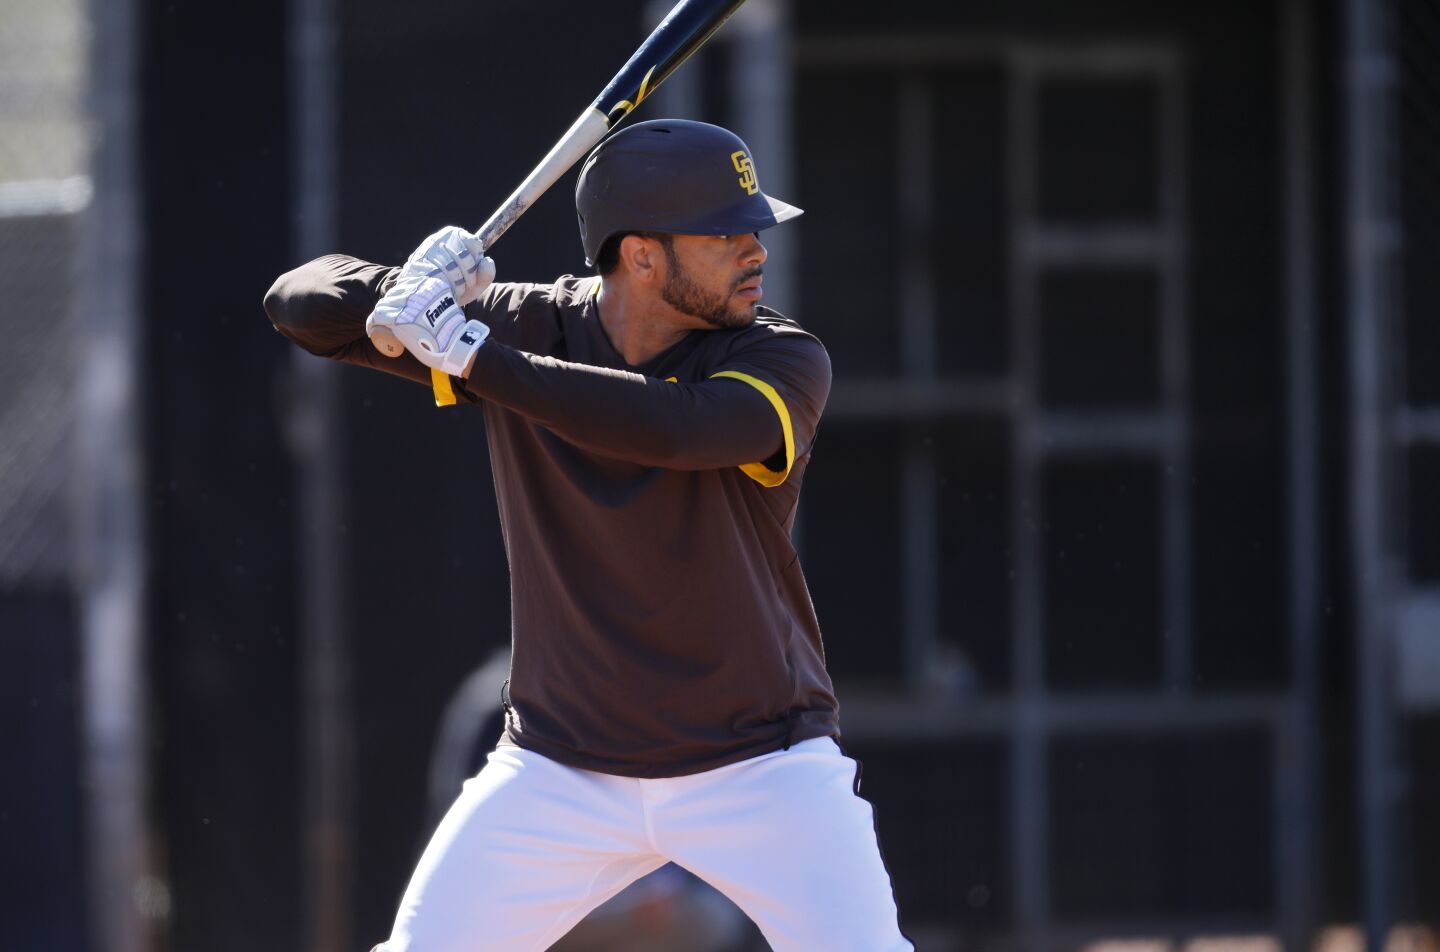 San Diego Padres Tommy Pham bats during a spring training practice on Feb. 20, 2020.